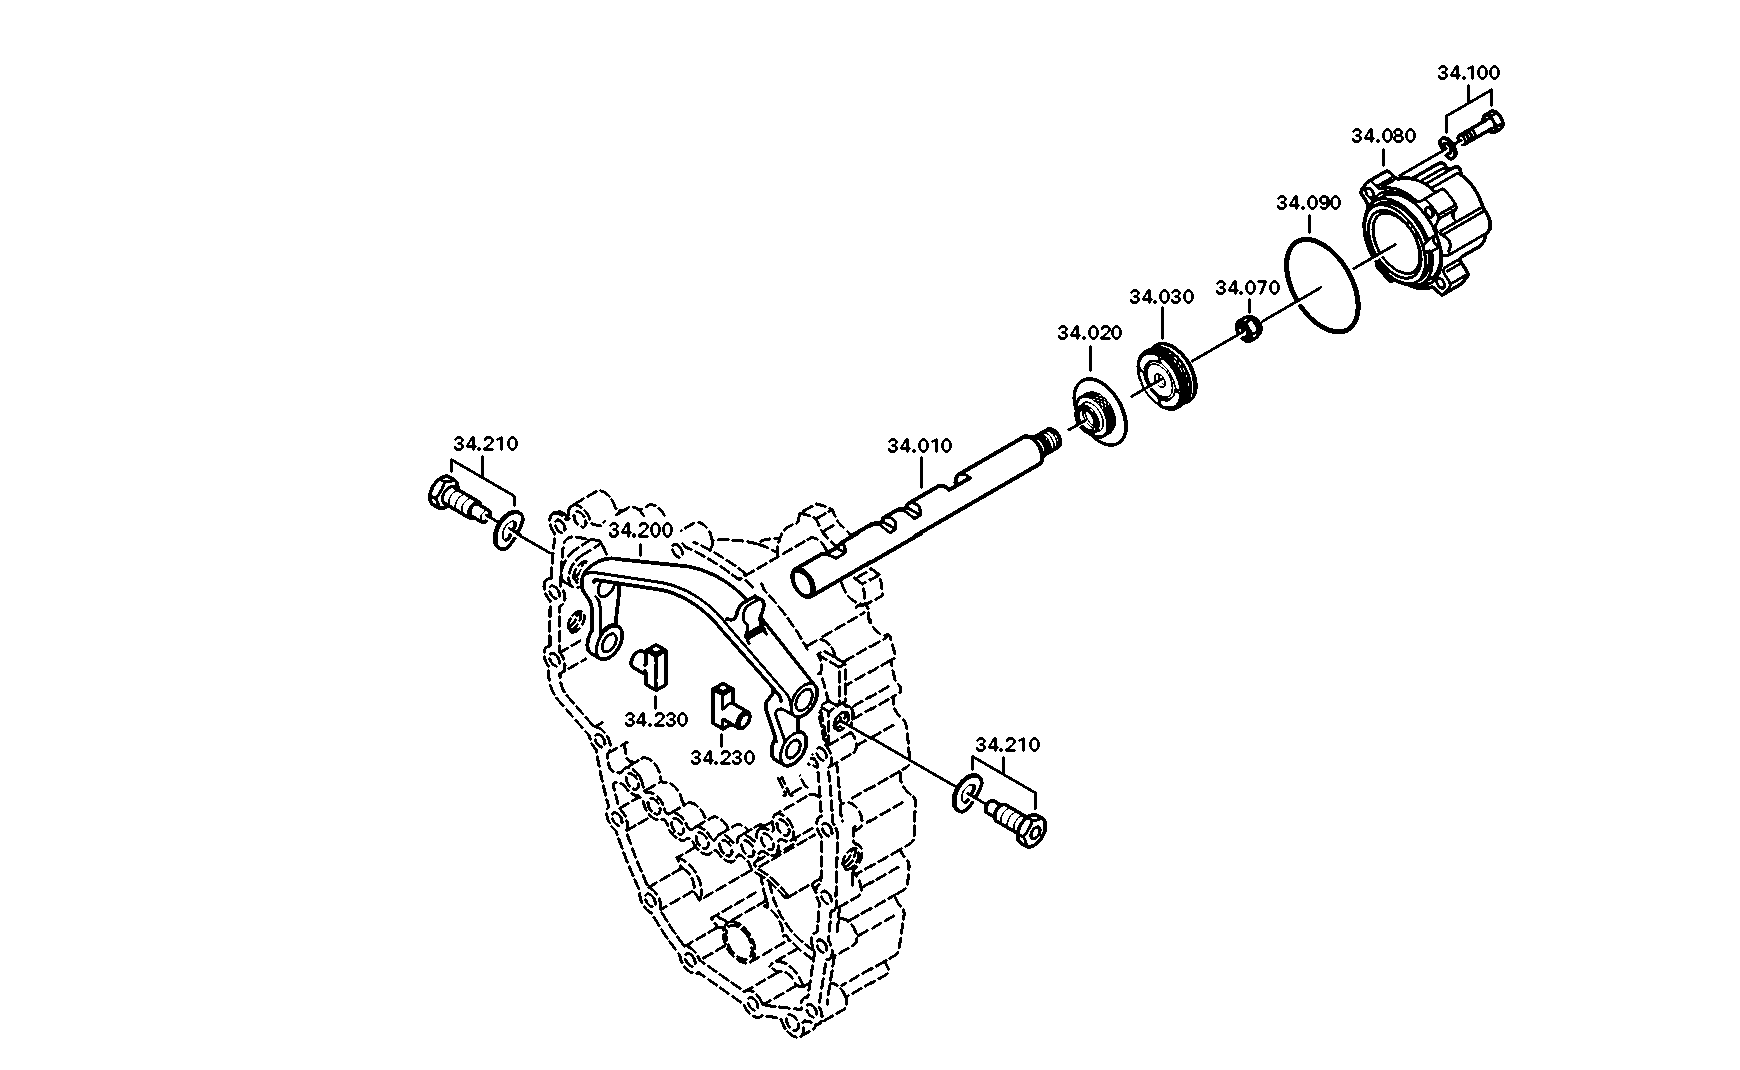 drawing for ASIA MOTORS CO. INC. 409-01-0380 - FLANGE PACKING (figure 1)